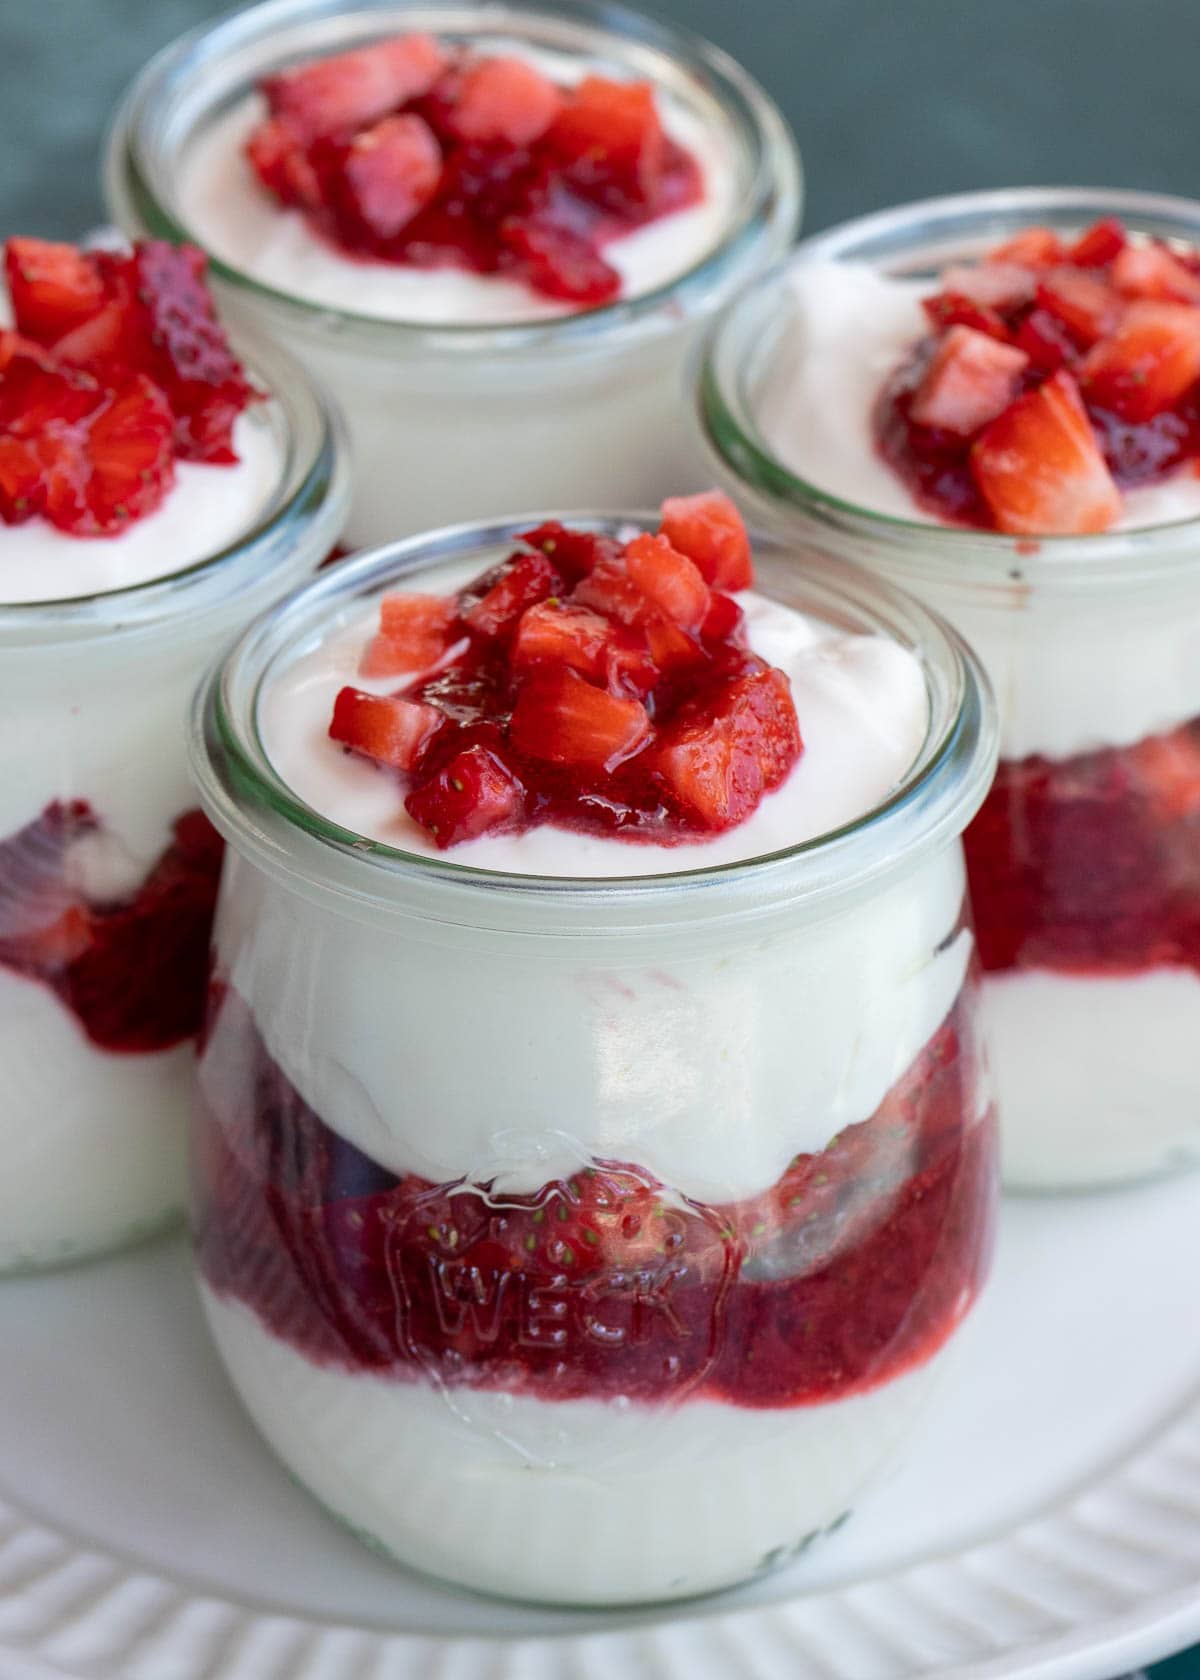 These cute Strawberry Cheesecake Jars are a decadent no-bake dessert! Sweet and creamy vanilla cheesecake is layered with homemade strawberry sauce and fresh berries for the perfect treat!